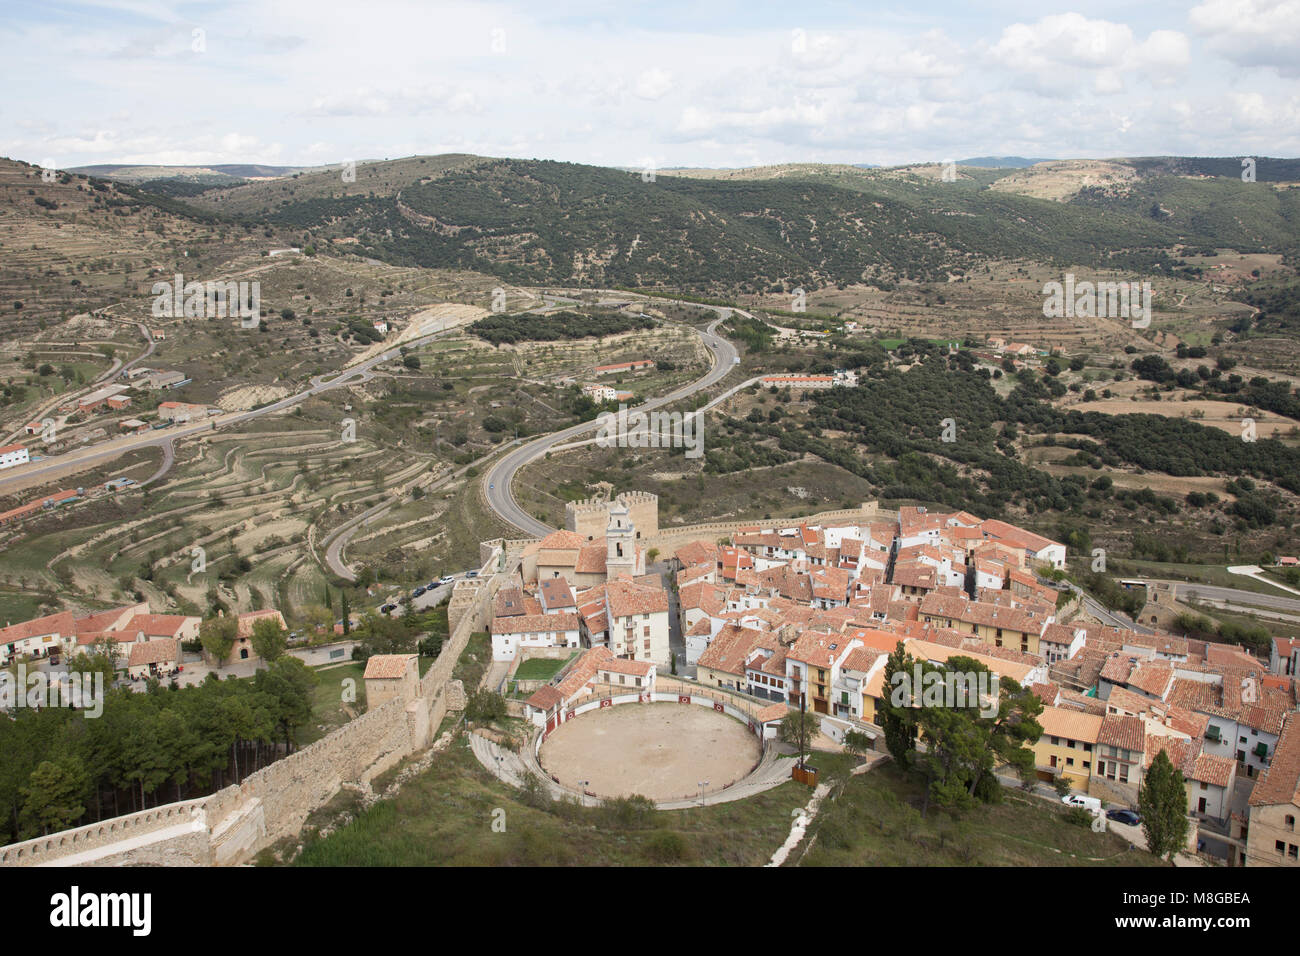 View from the fort at the top. Morella is an ancient walled city located on a hill-top in the province of Castellón, Valencian Community, Spain. Stock Photo